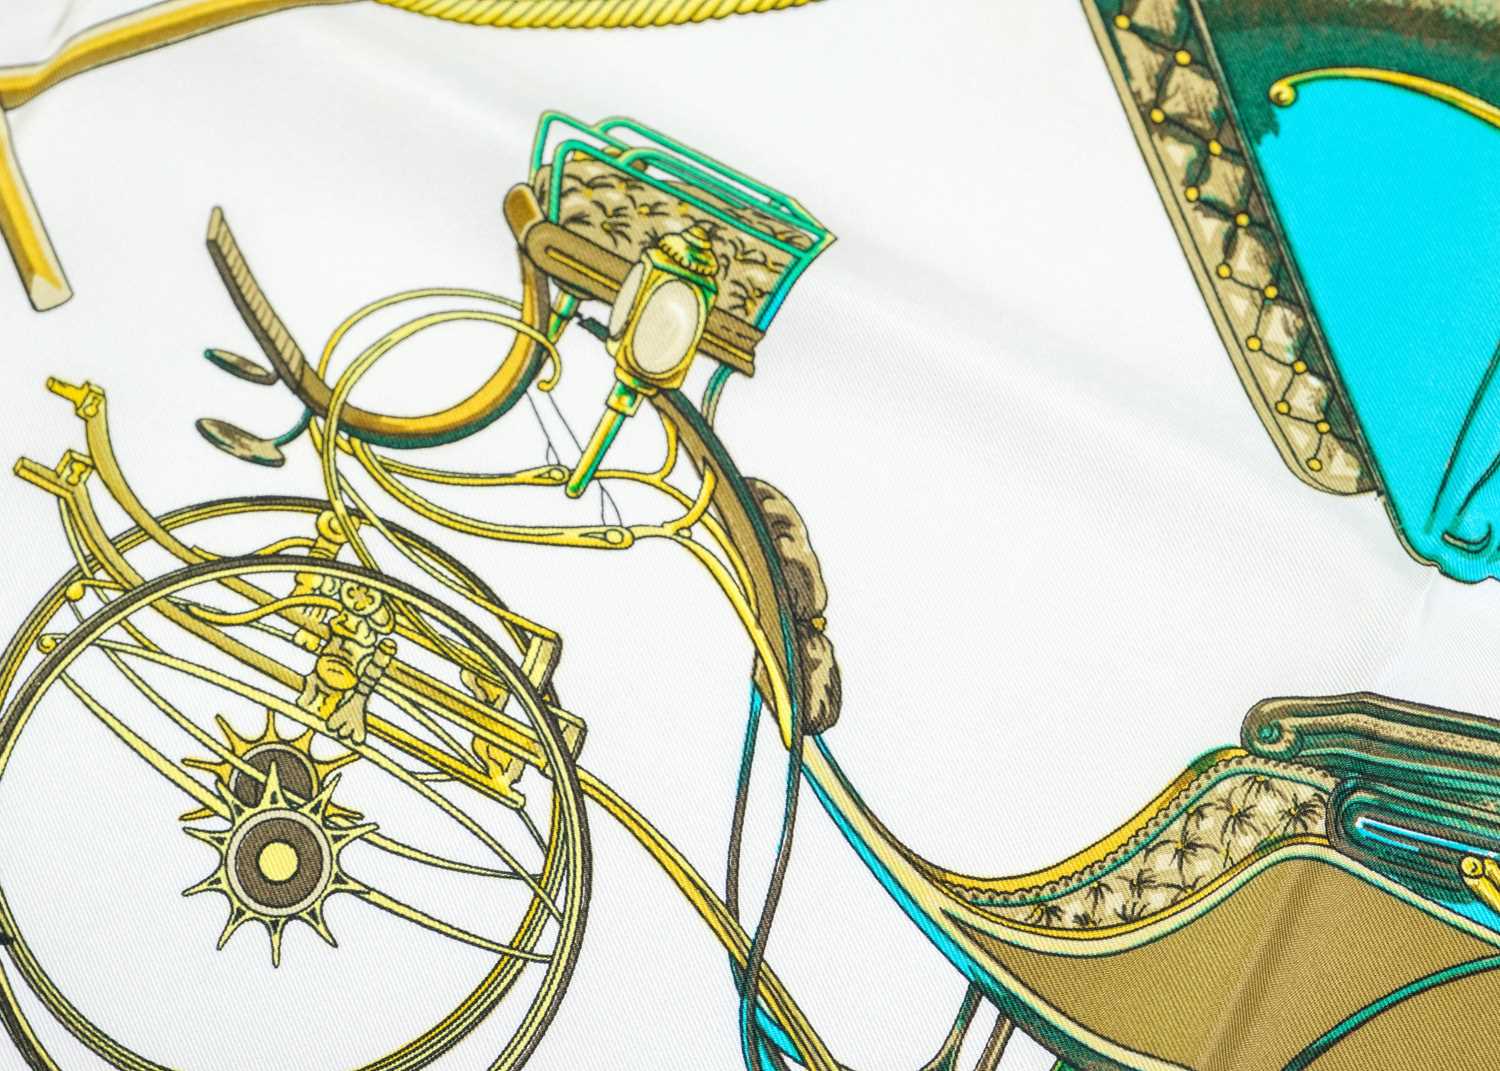 HERMES - A silk scarf in 'Les voitures a transformation' pattern designed by La Perriere. - Image 3 of 6